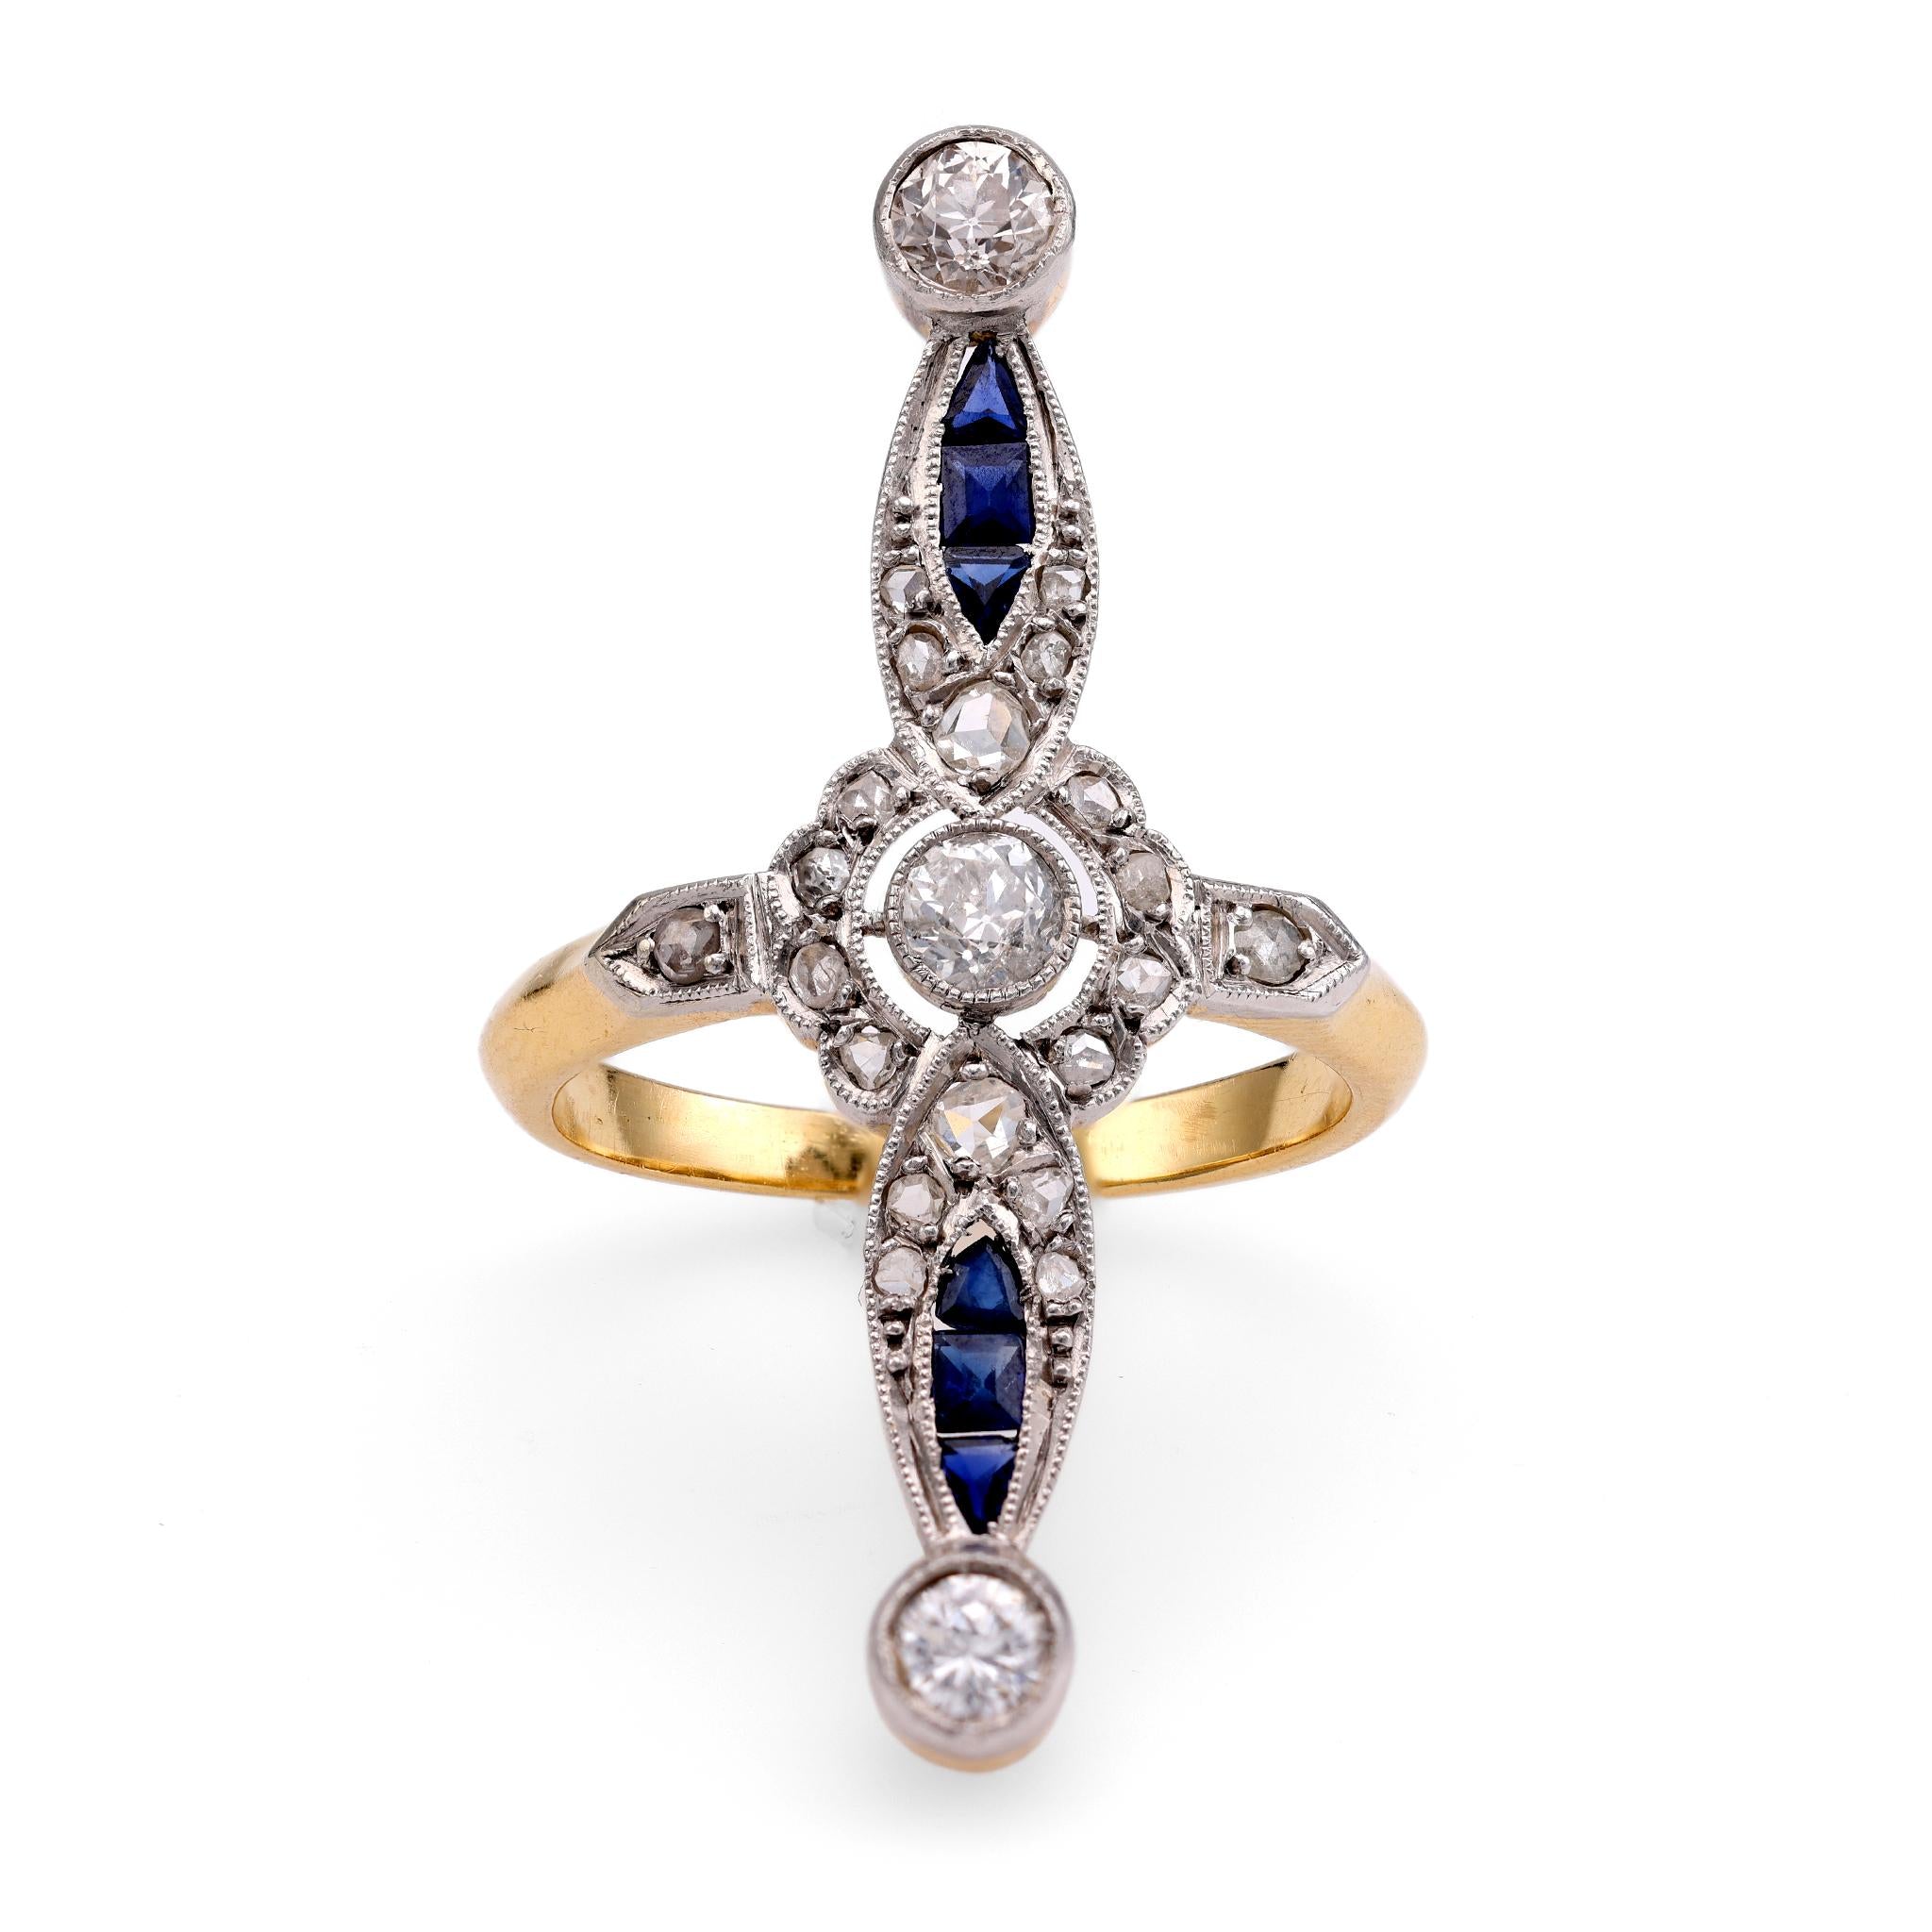 Belle Epoque Diamond and Sapphire Cocktail Ring